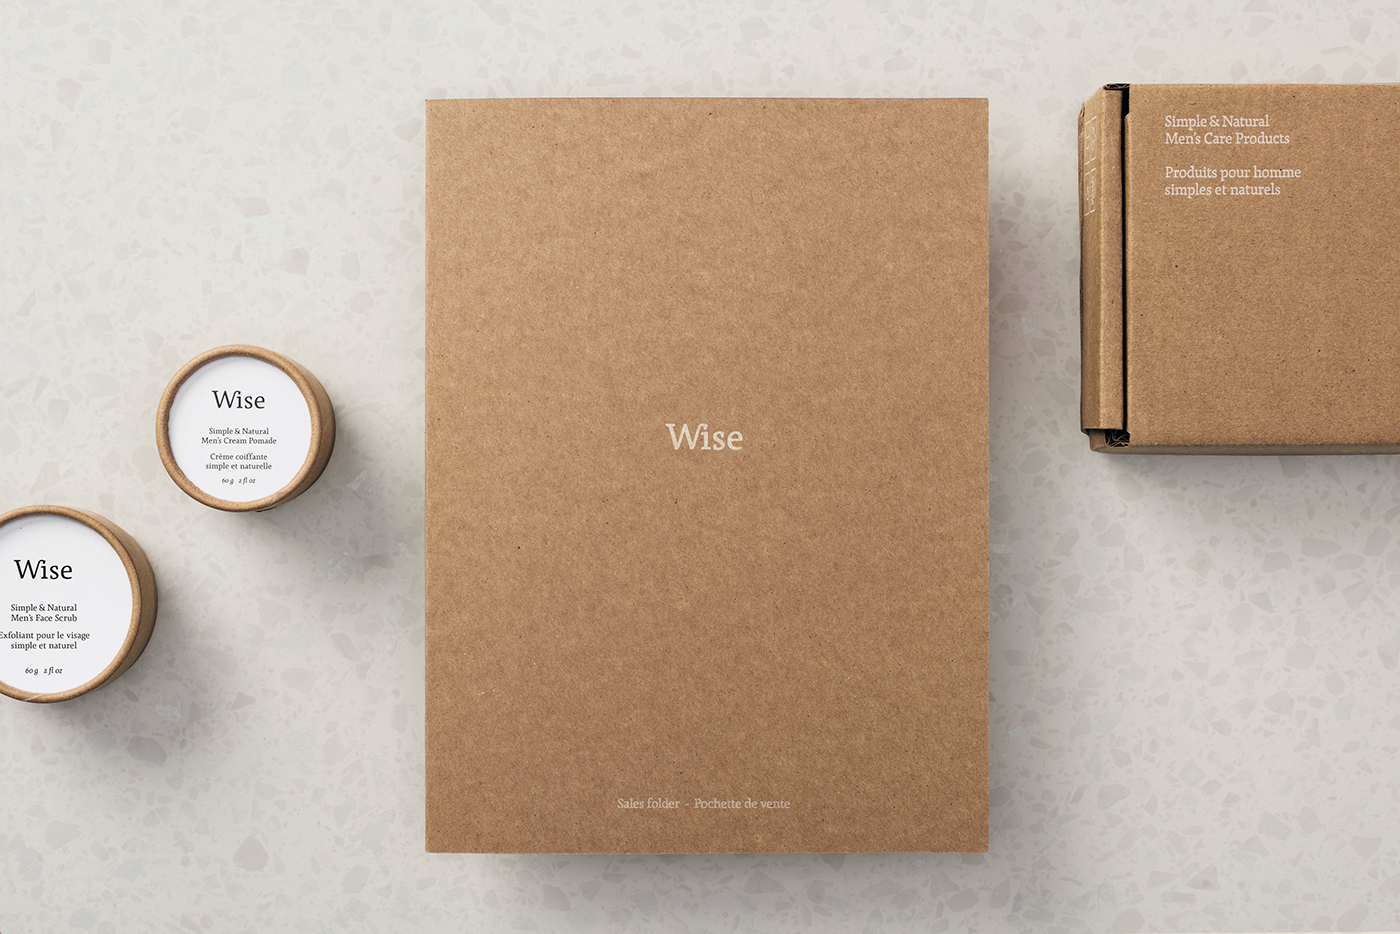 Wise Eco-packagings Hair Pomade shampoo natural Montreal men's care styling  revolutionary eco-conscious